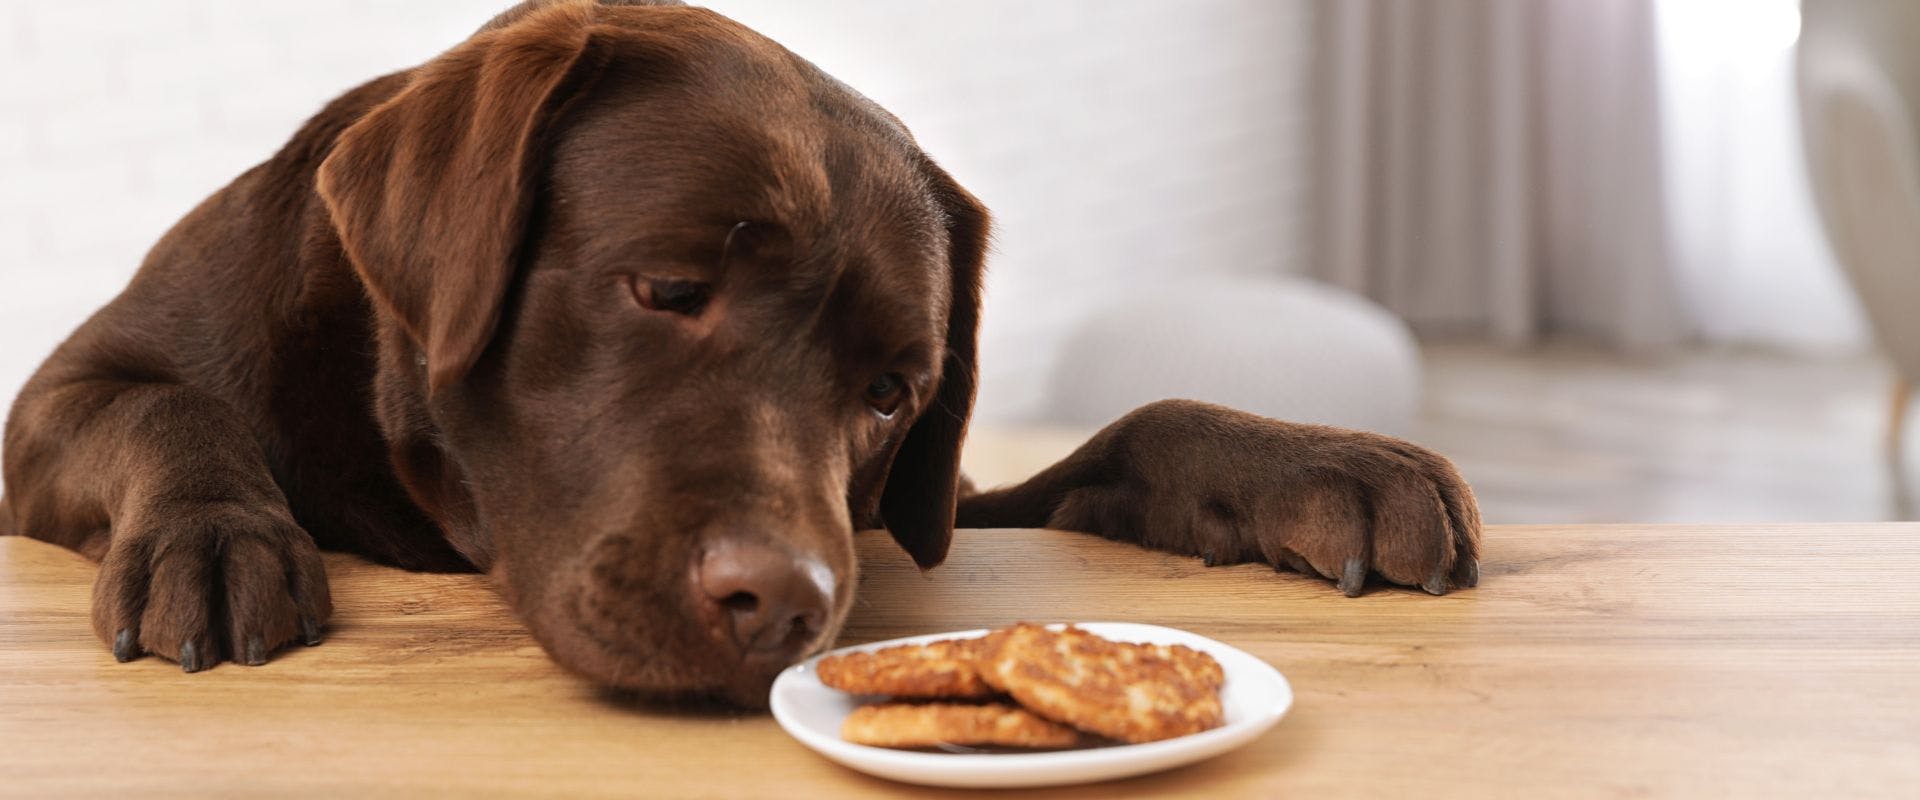 Brown Labrador sniffing cookies on the table